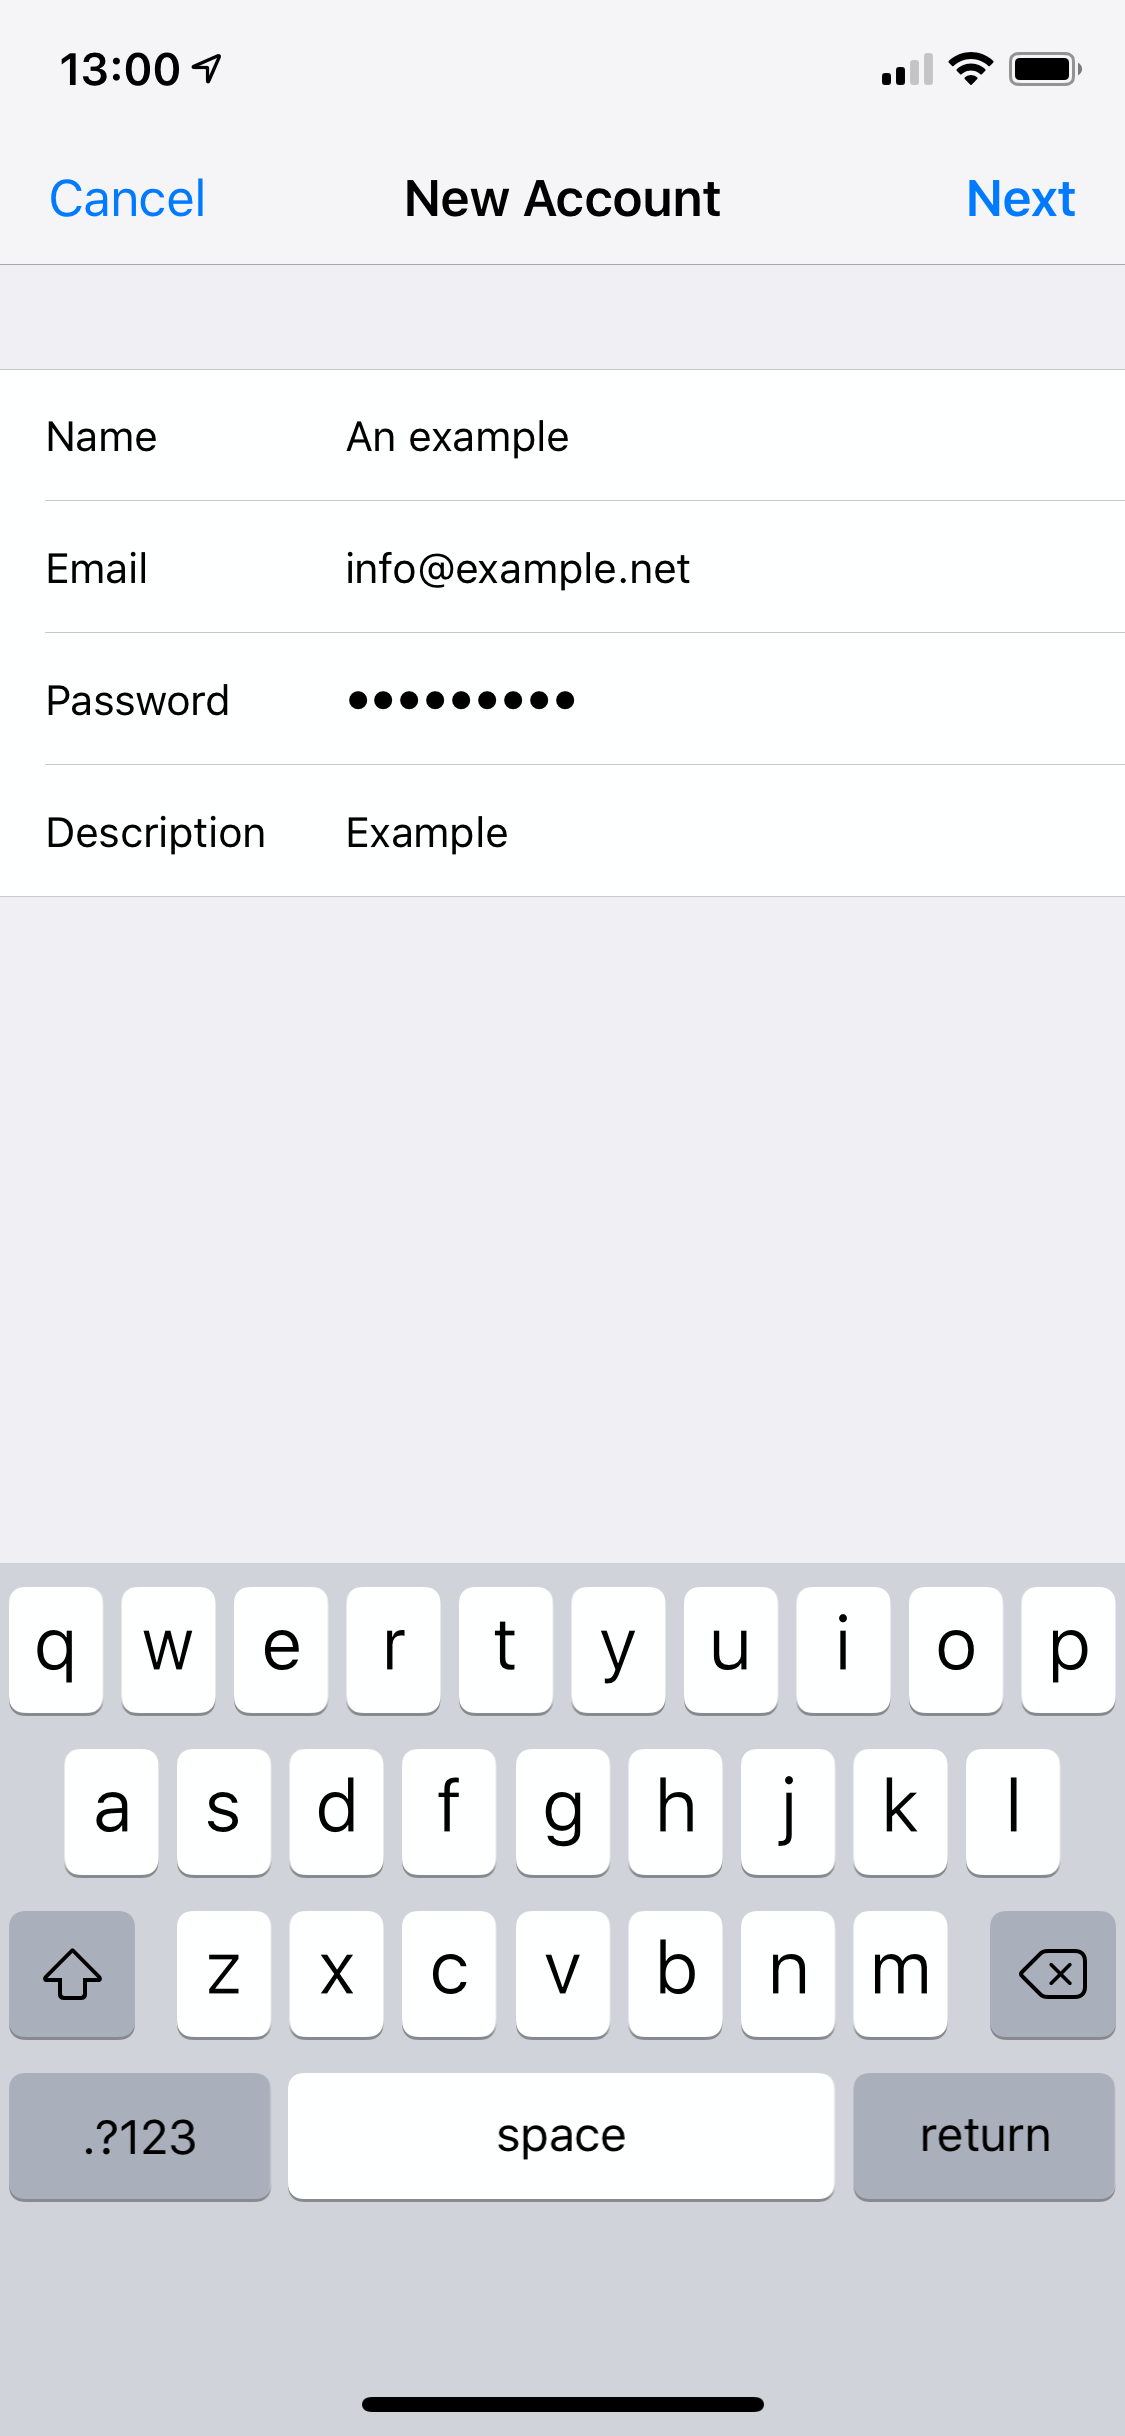 Entering the account information in the iOS mail app.